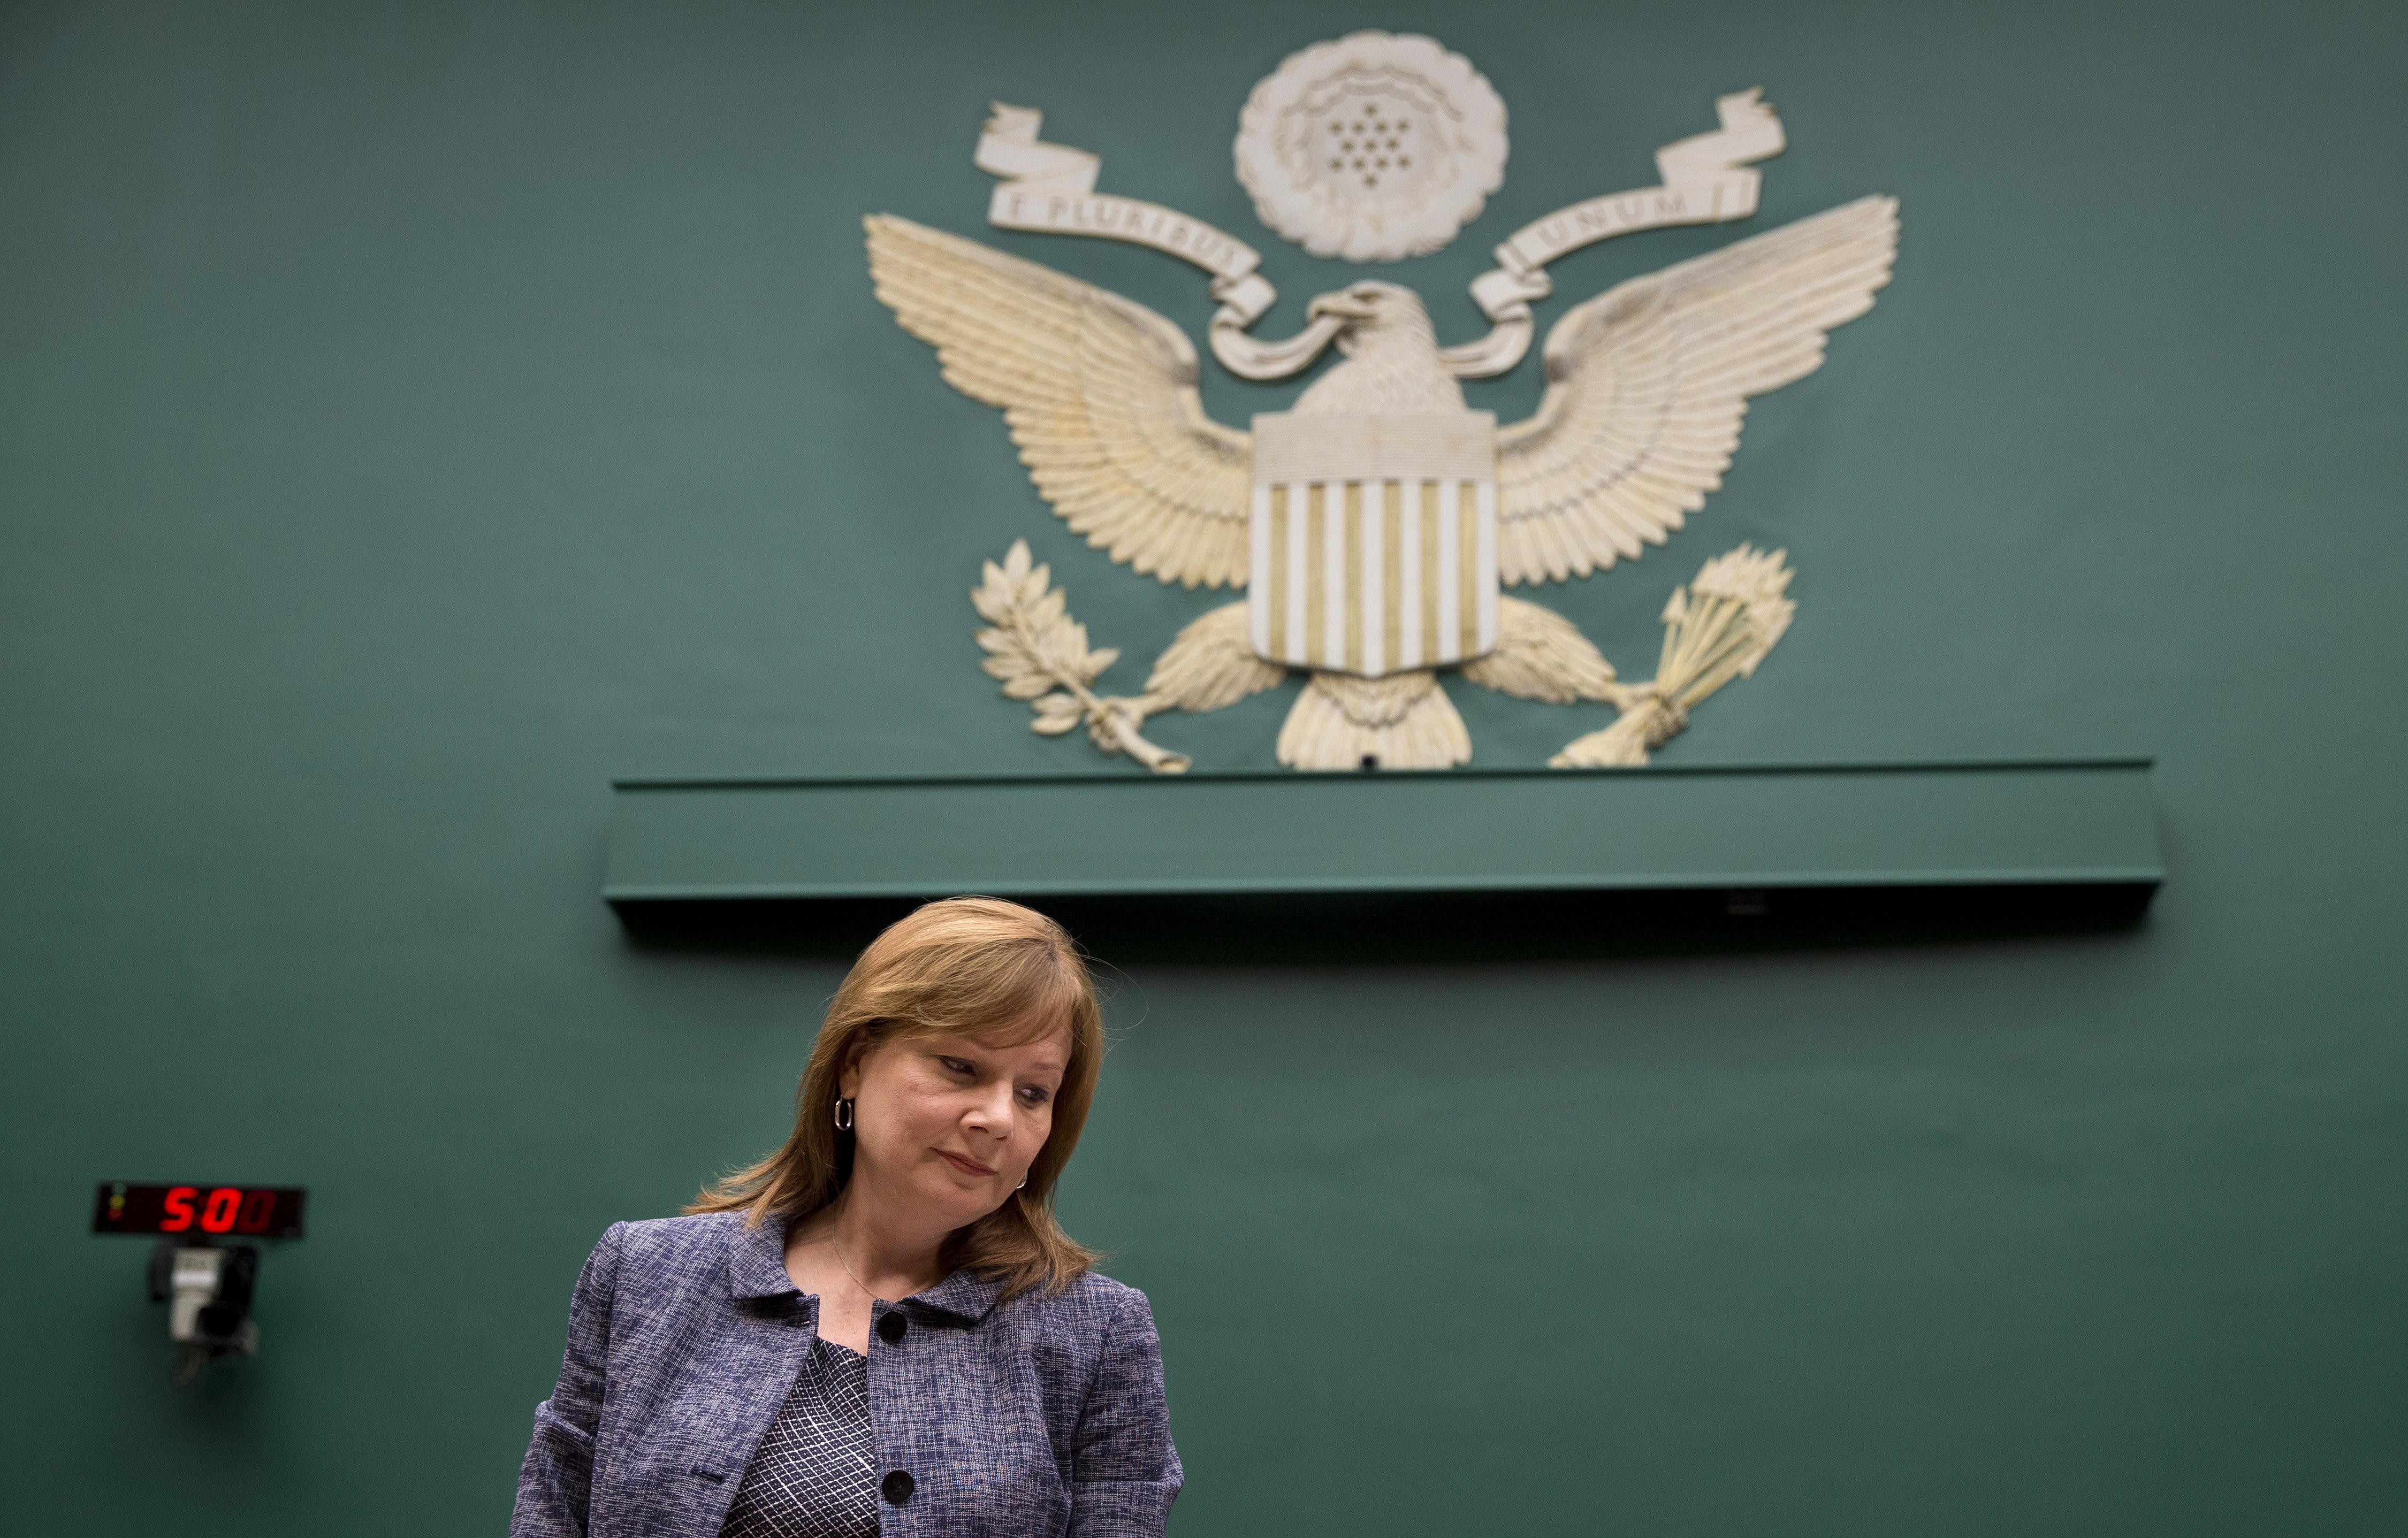 GM CEO Mary Barra takes her seat on Capitol Hill in Washington on April 1, 2014, prior to testifying before the House Energy and Commerce Subcommittee on Oversight and Investigations (Evan Vucci—AP)